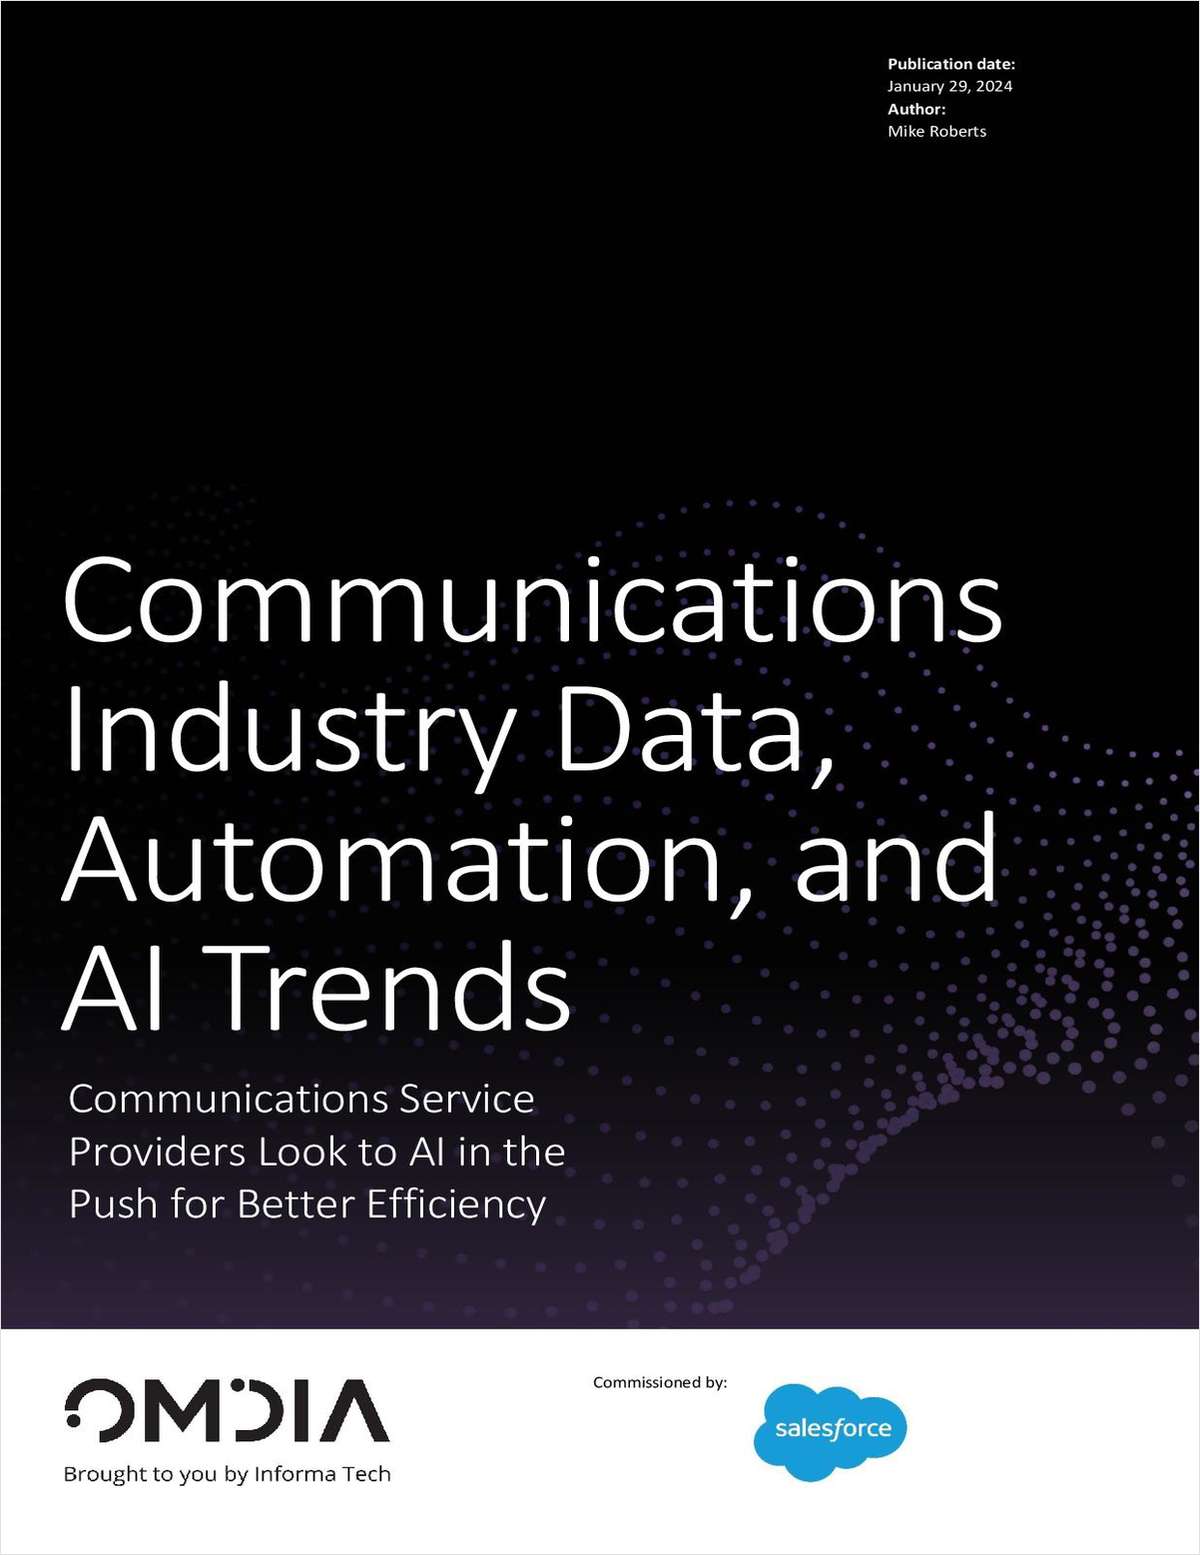 Survey: Communications Industry Data, Automation, and AI Trends